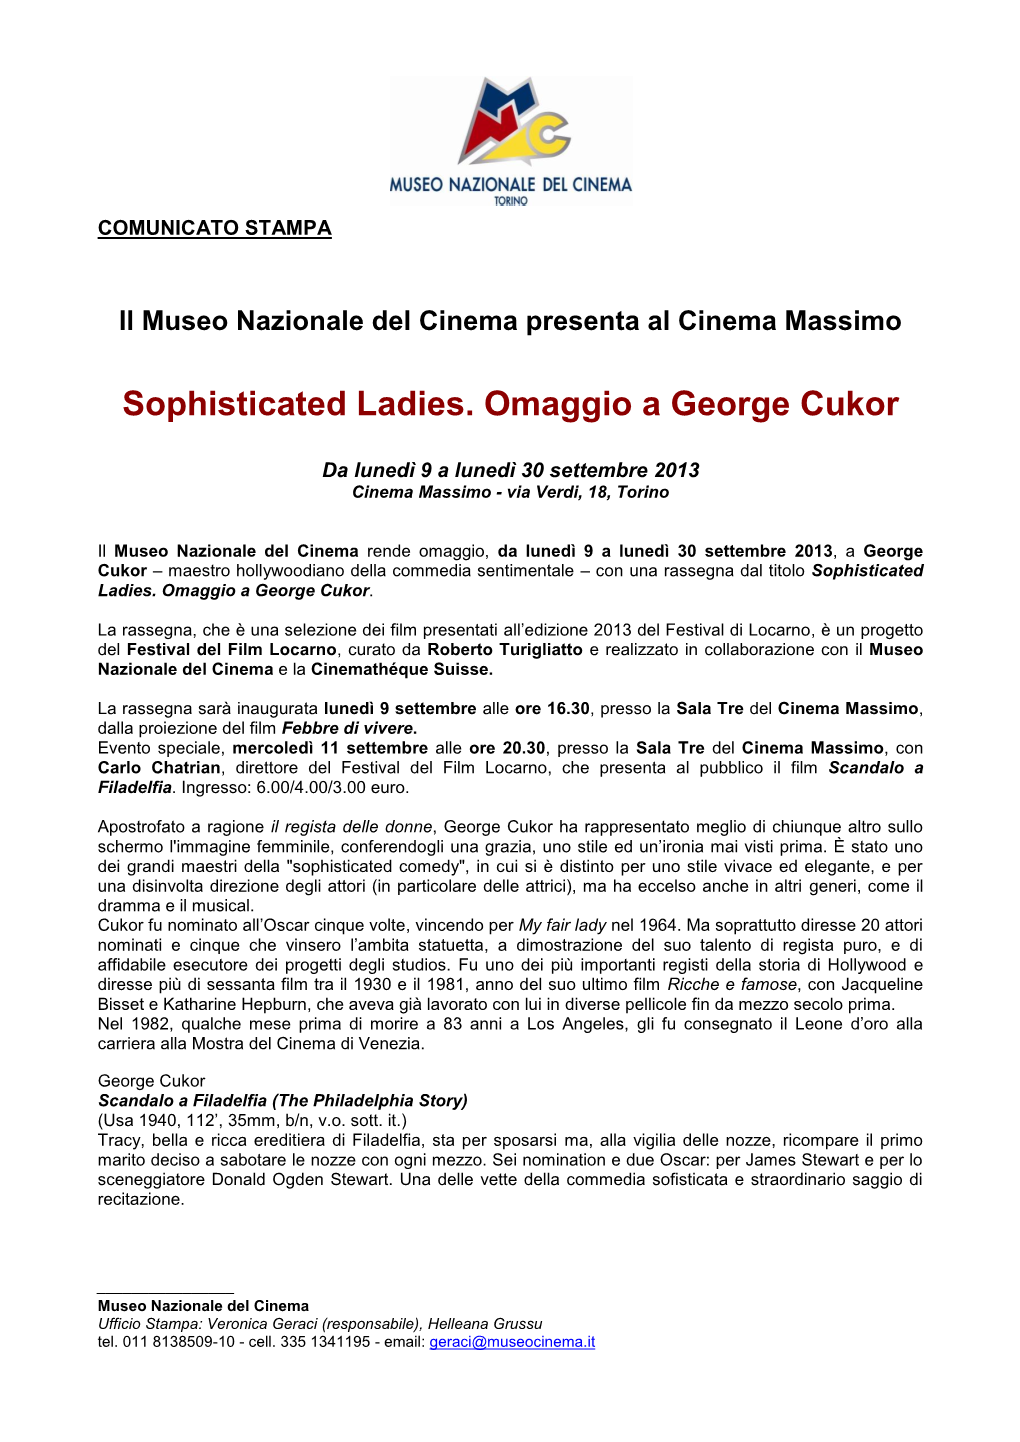 Sophisticated Ladies. Omaggio a George Cukor